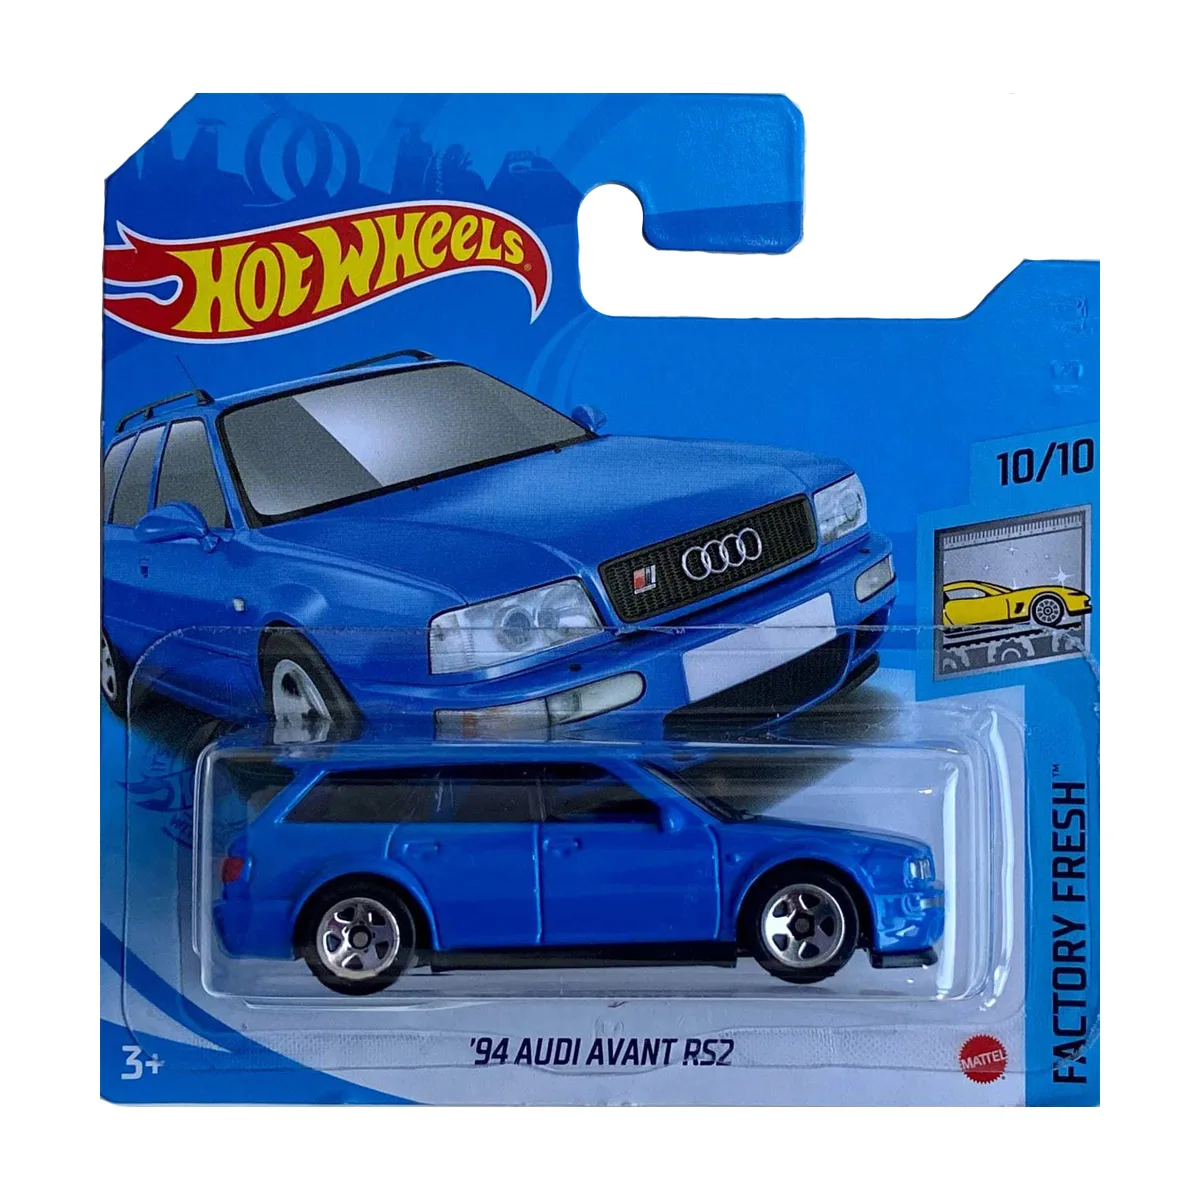 

Hot Wheels Factory Fresh '94 Audi Avant Rs2 Collection Metal Case Diecast Cars Kids Toys Gift For Child Luxury Wagon